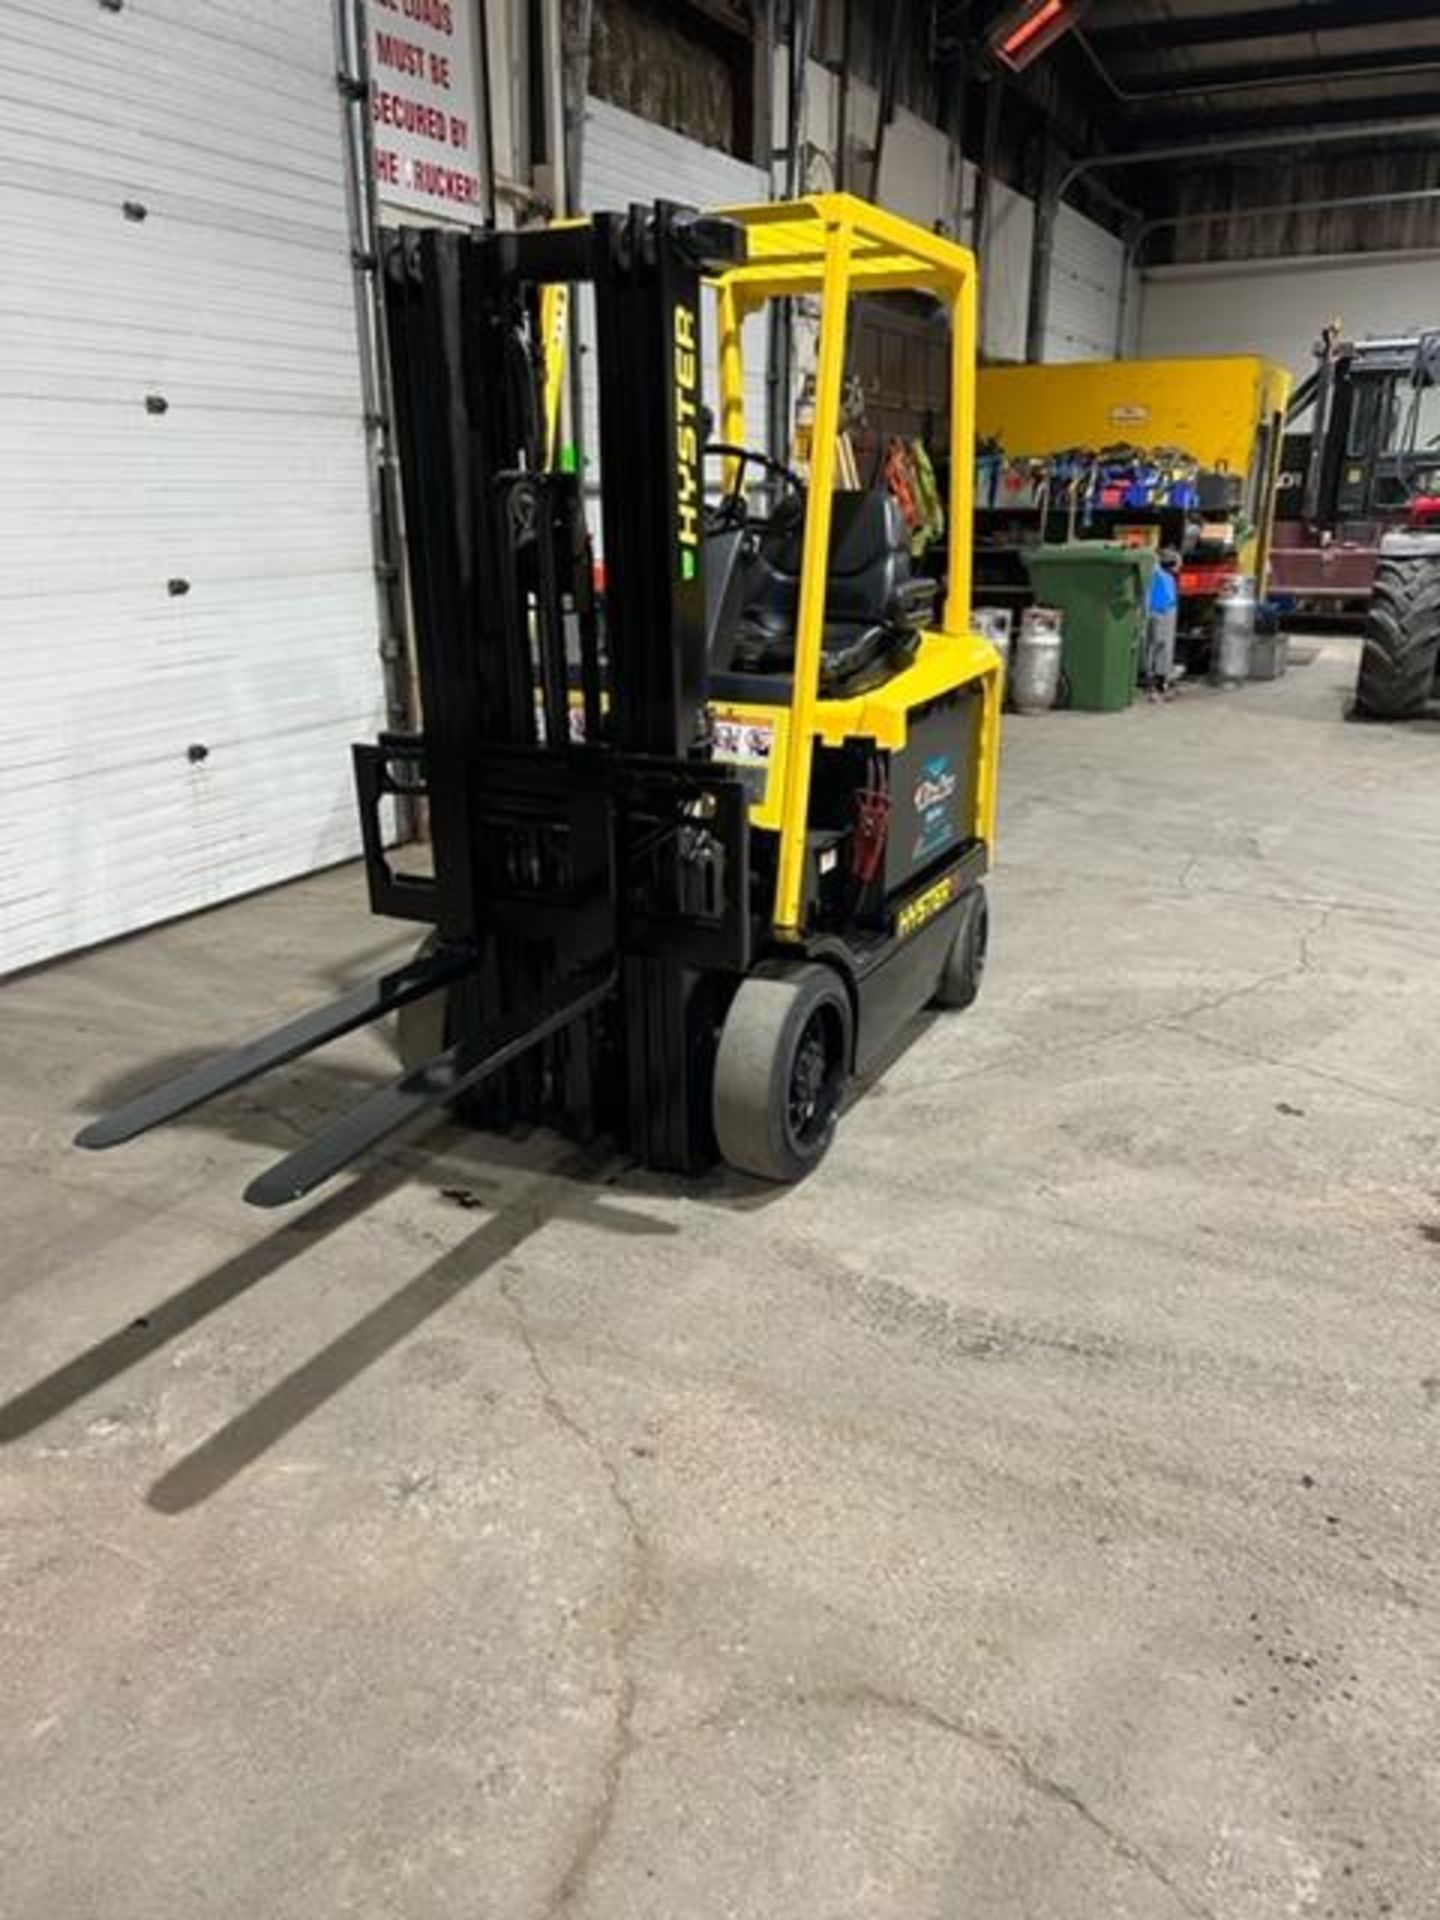 NICE 2008 Hyster model 45 - 4,500lbs Capacity Forklift Electric with Sideshift Option of - Image 2 of 3